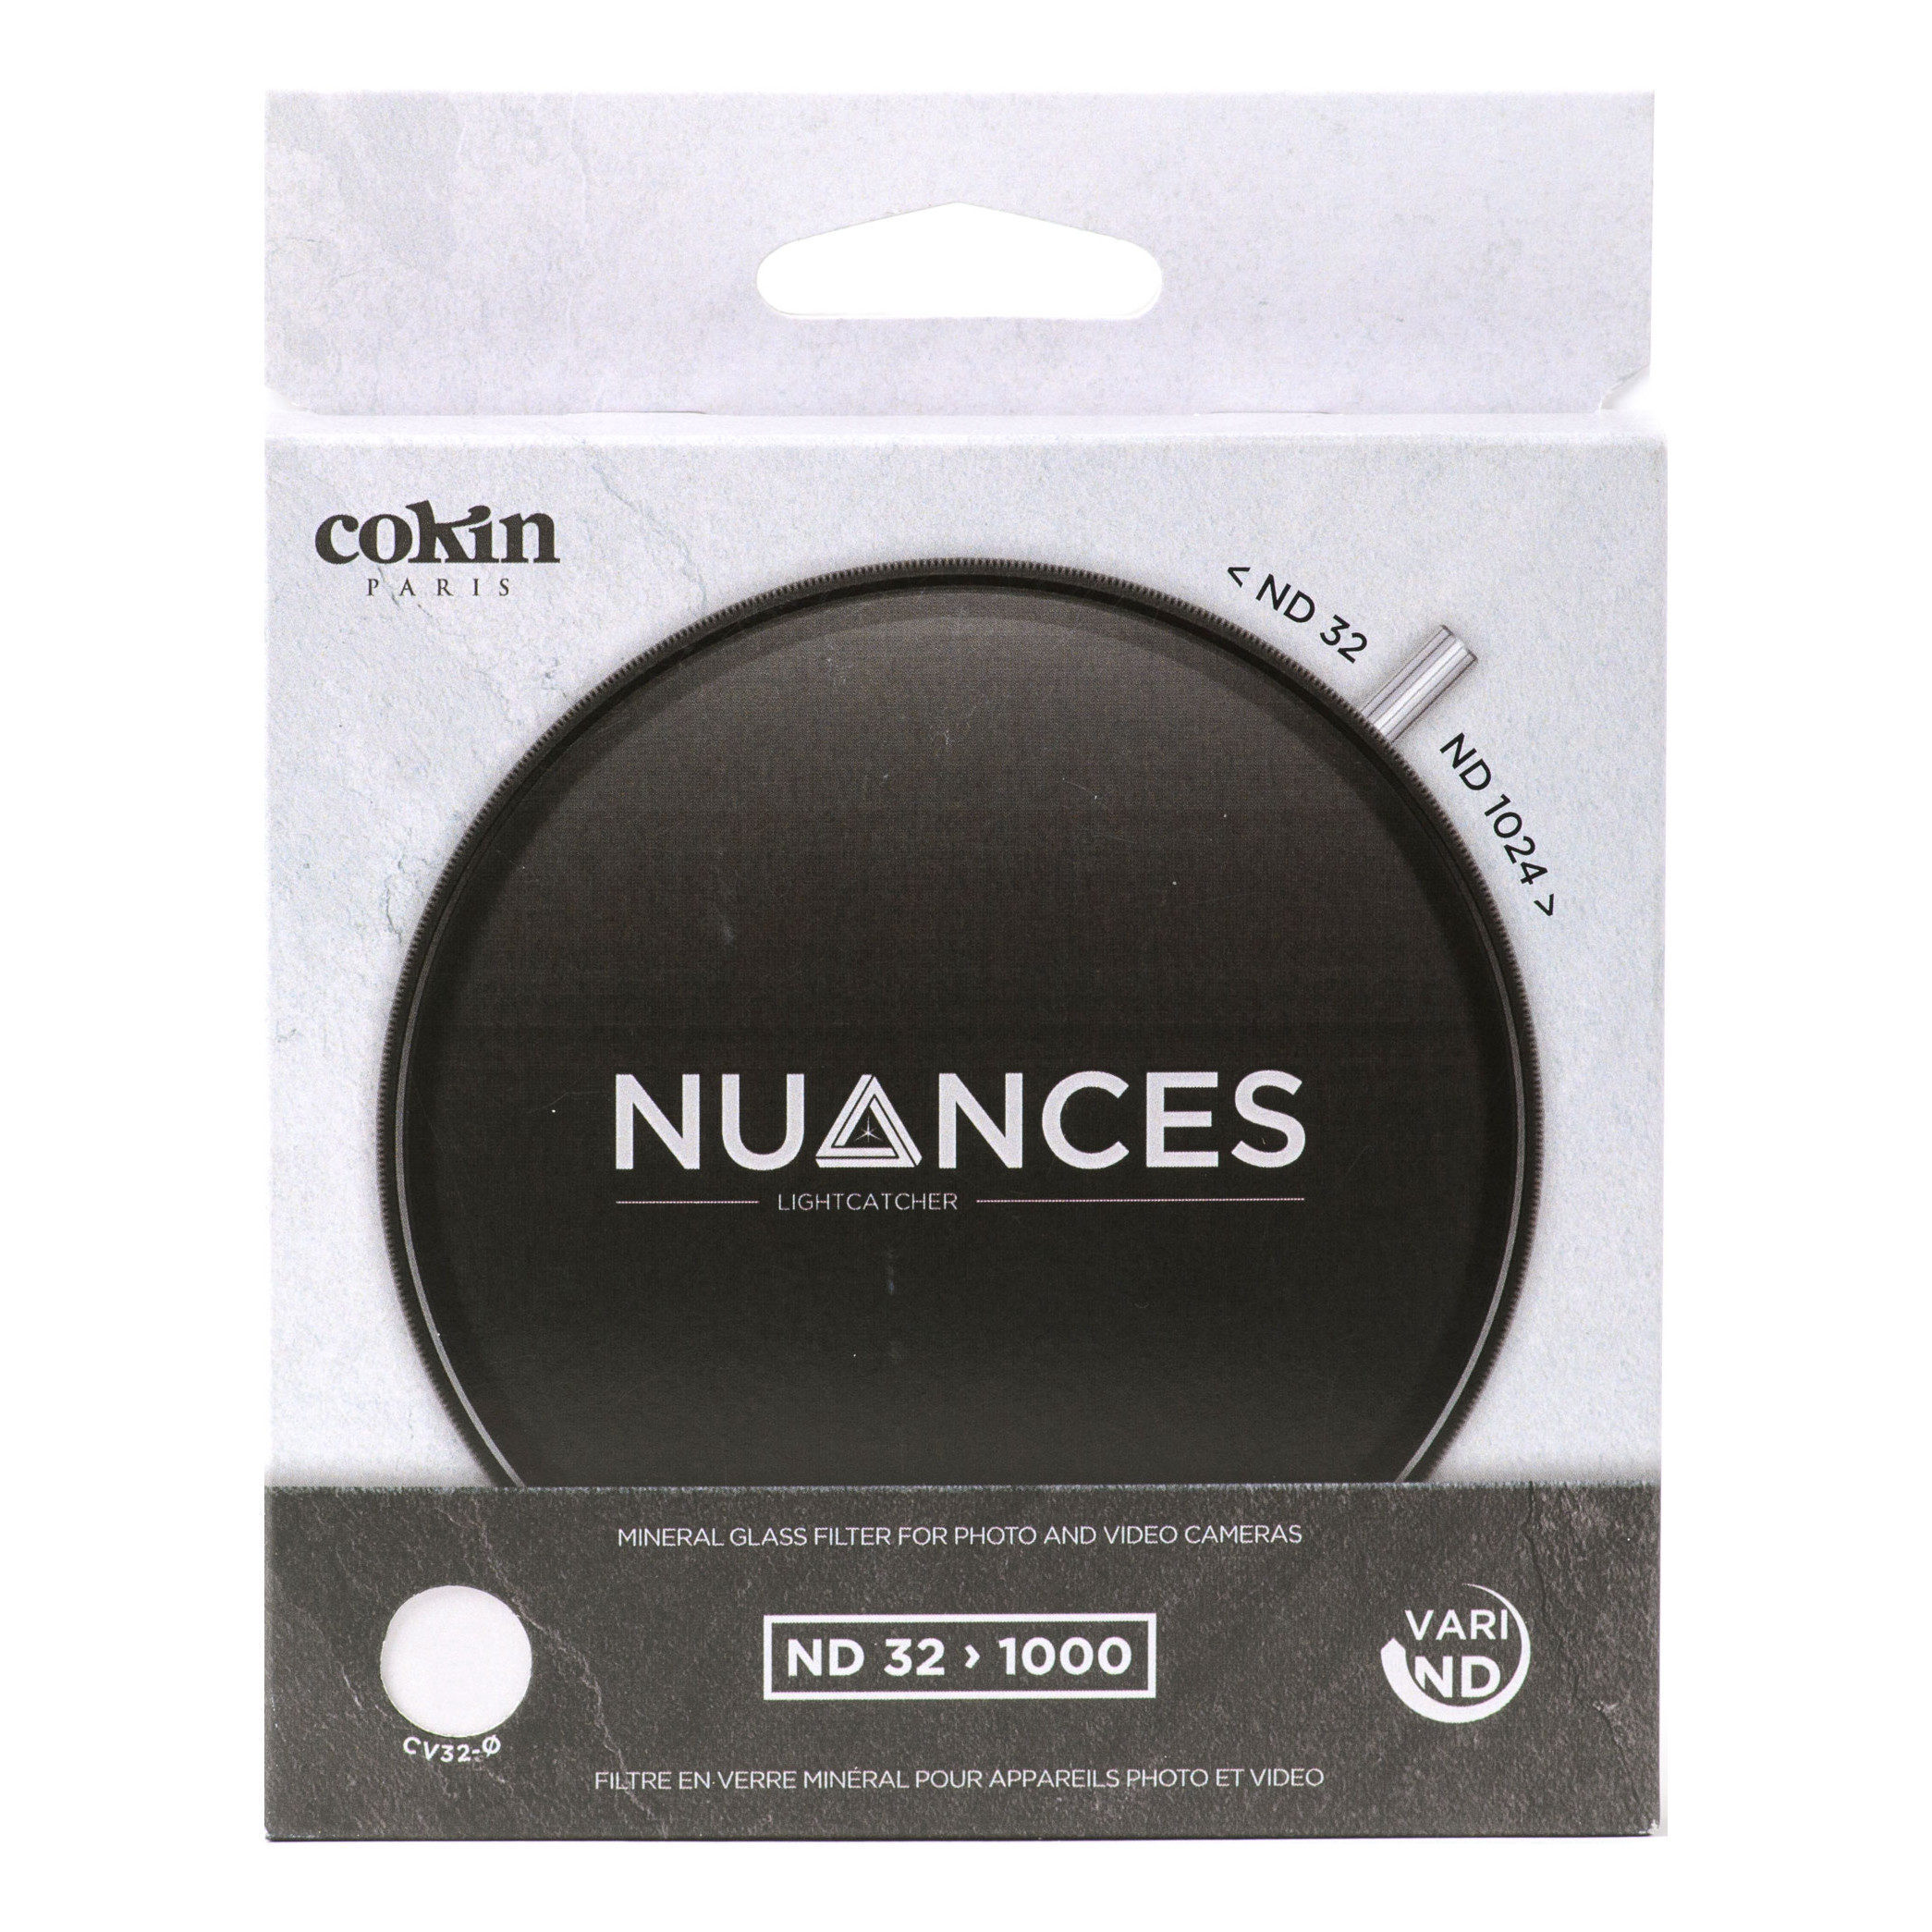 Cokin Round NUANCES NDX 32 1000 62mm 5 10 f stops